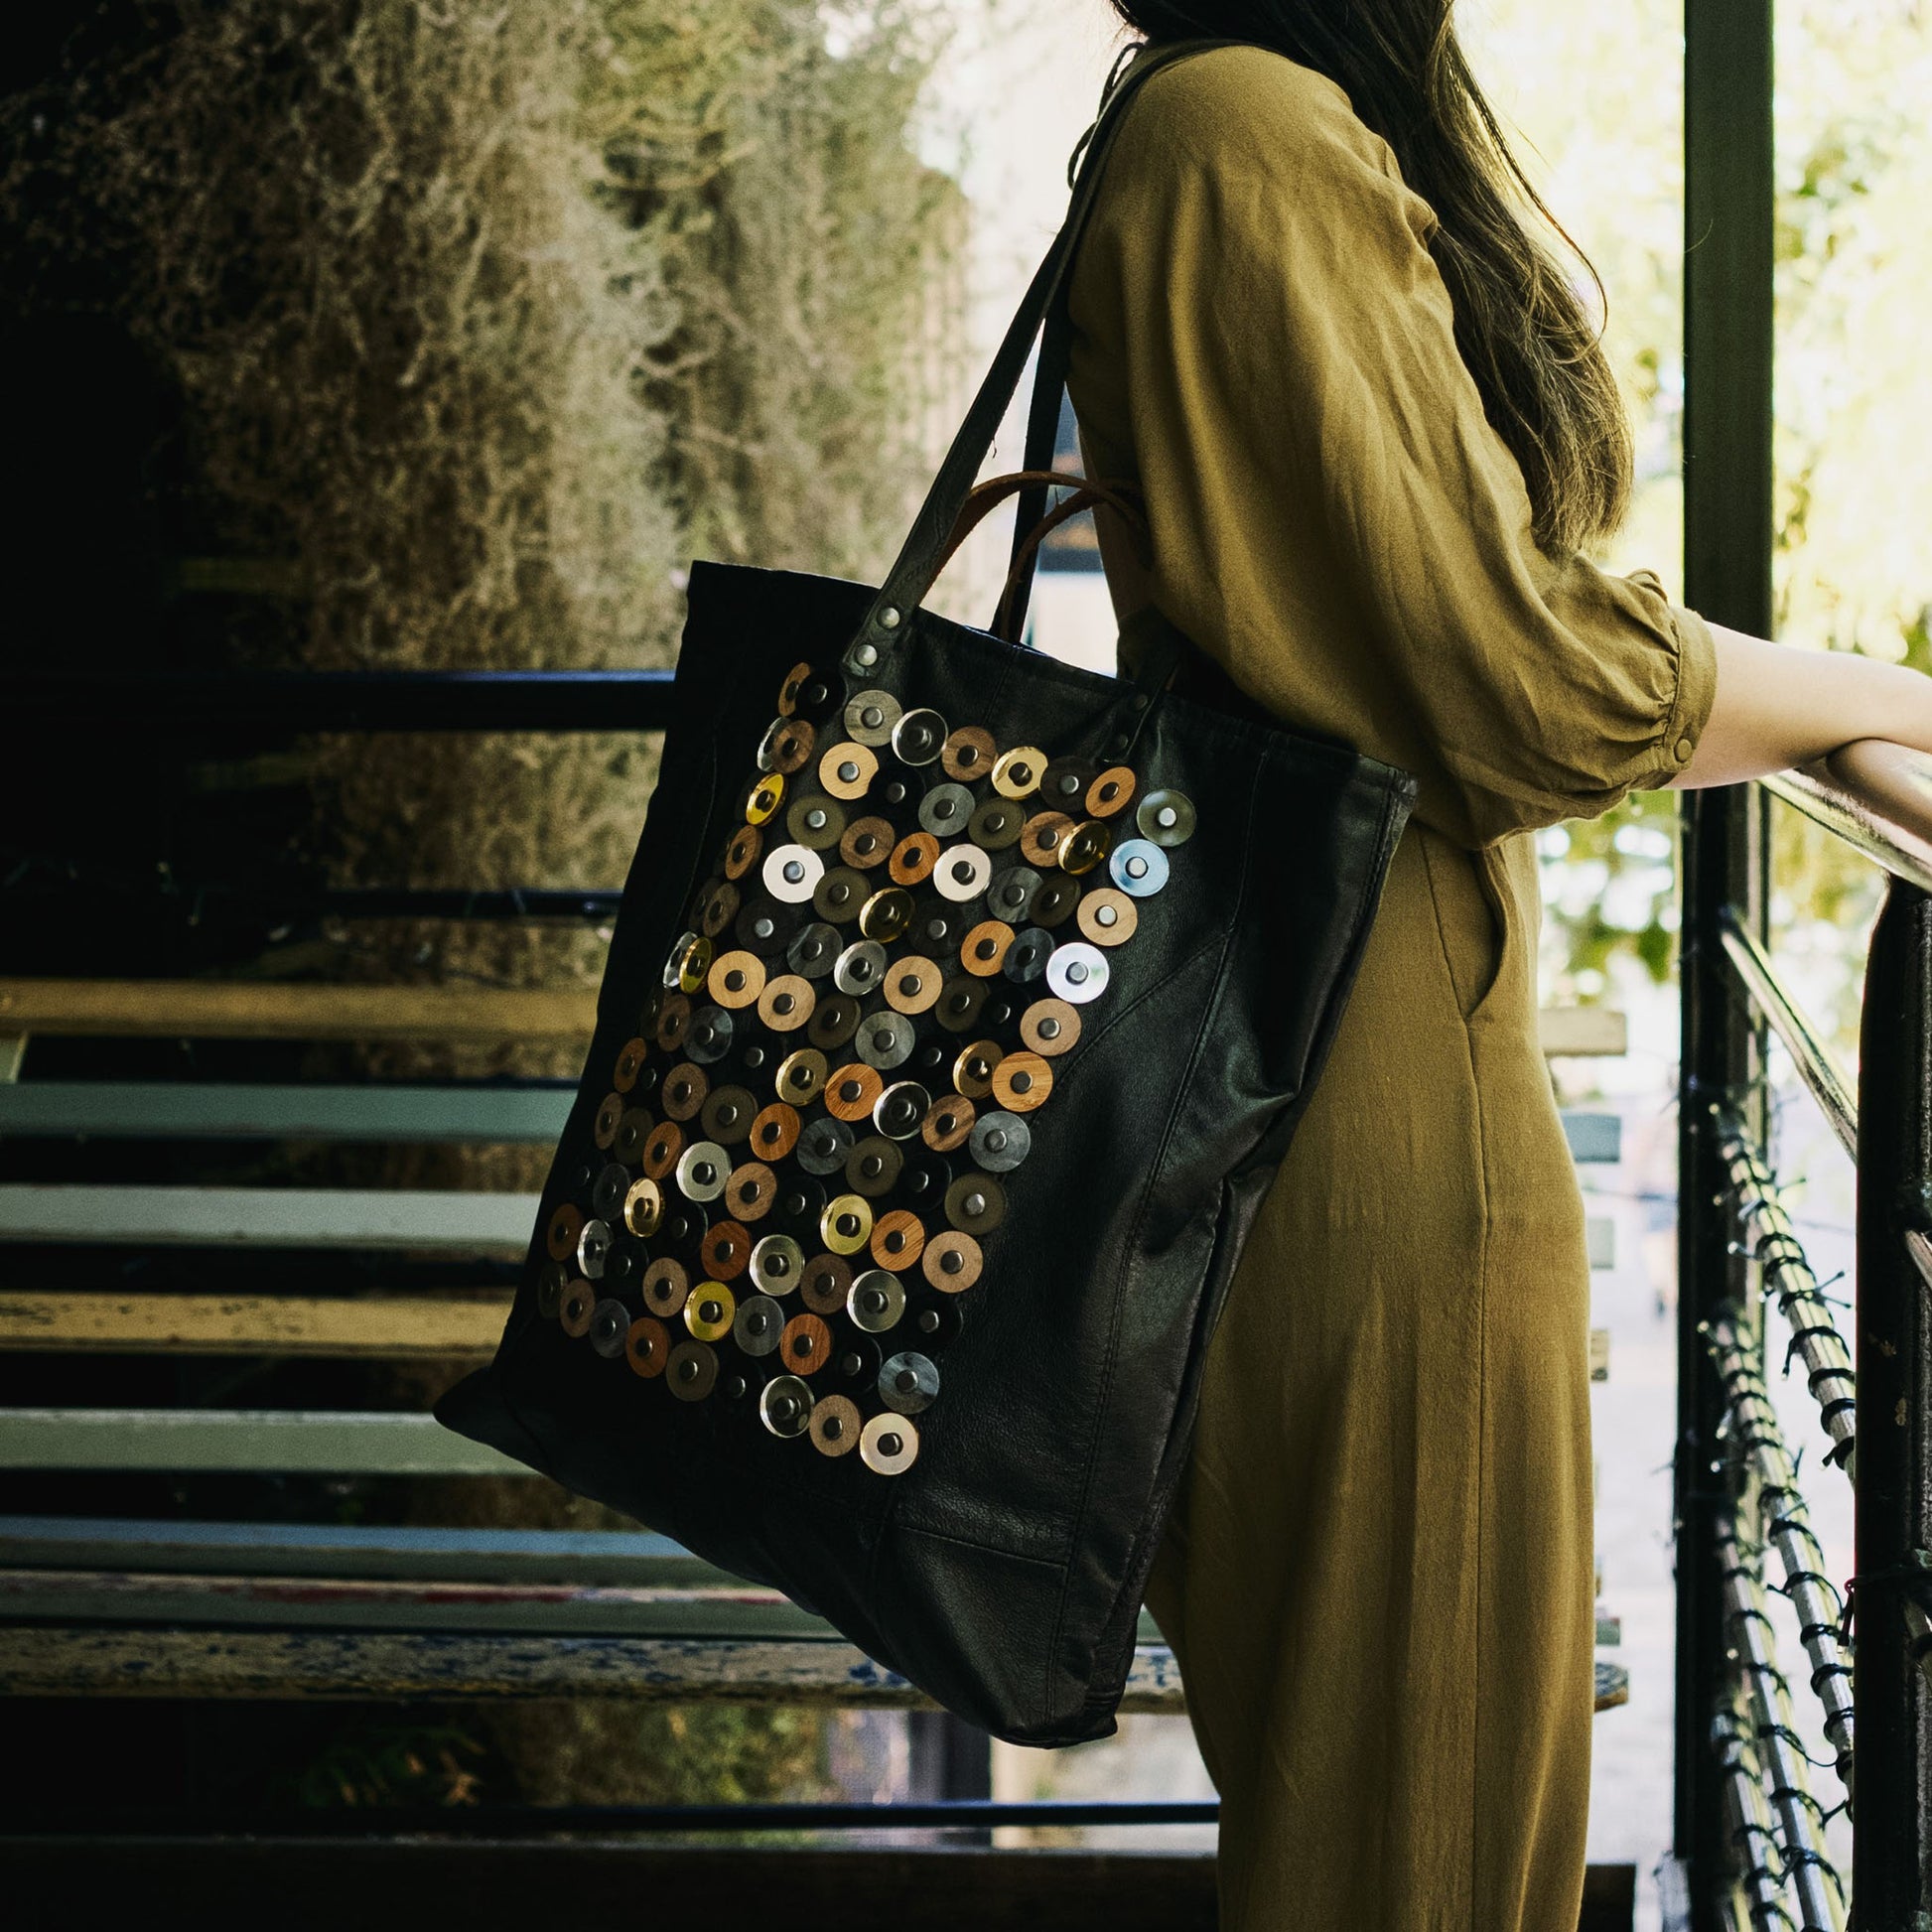 METANoIA black recycled leather tote handbag with  circle bamboo, walnut and acrylic forms fashioned into a repeative fashion with a smaller circle overlay on each form.  Model learning against balcony.